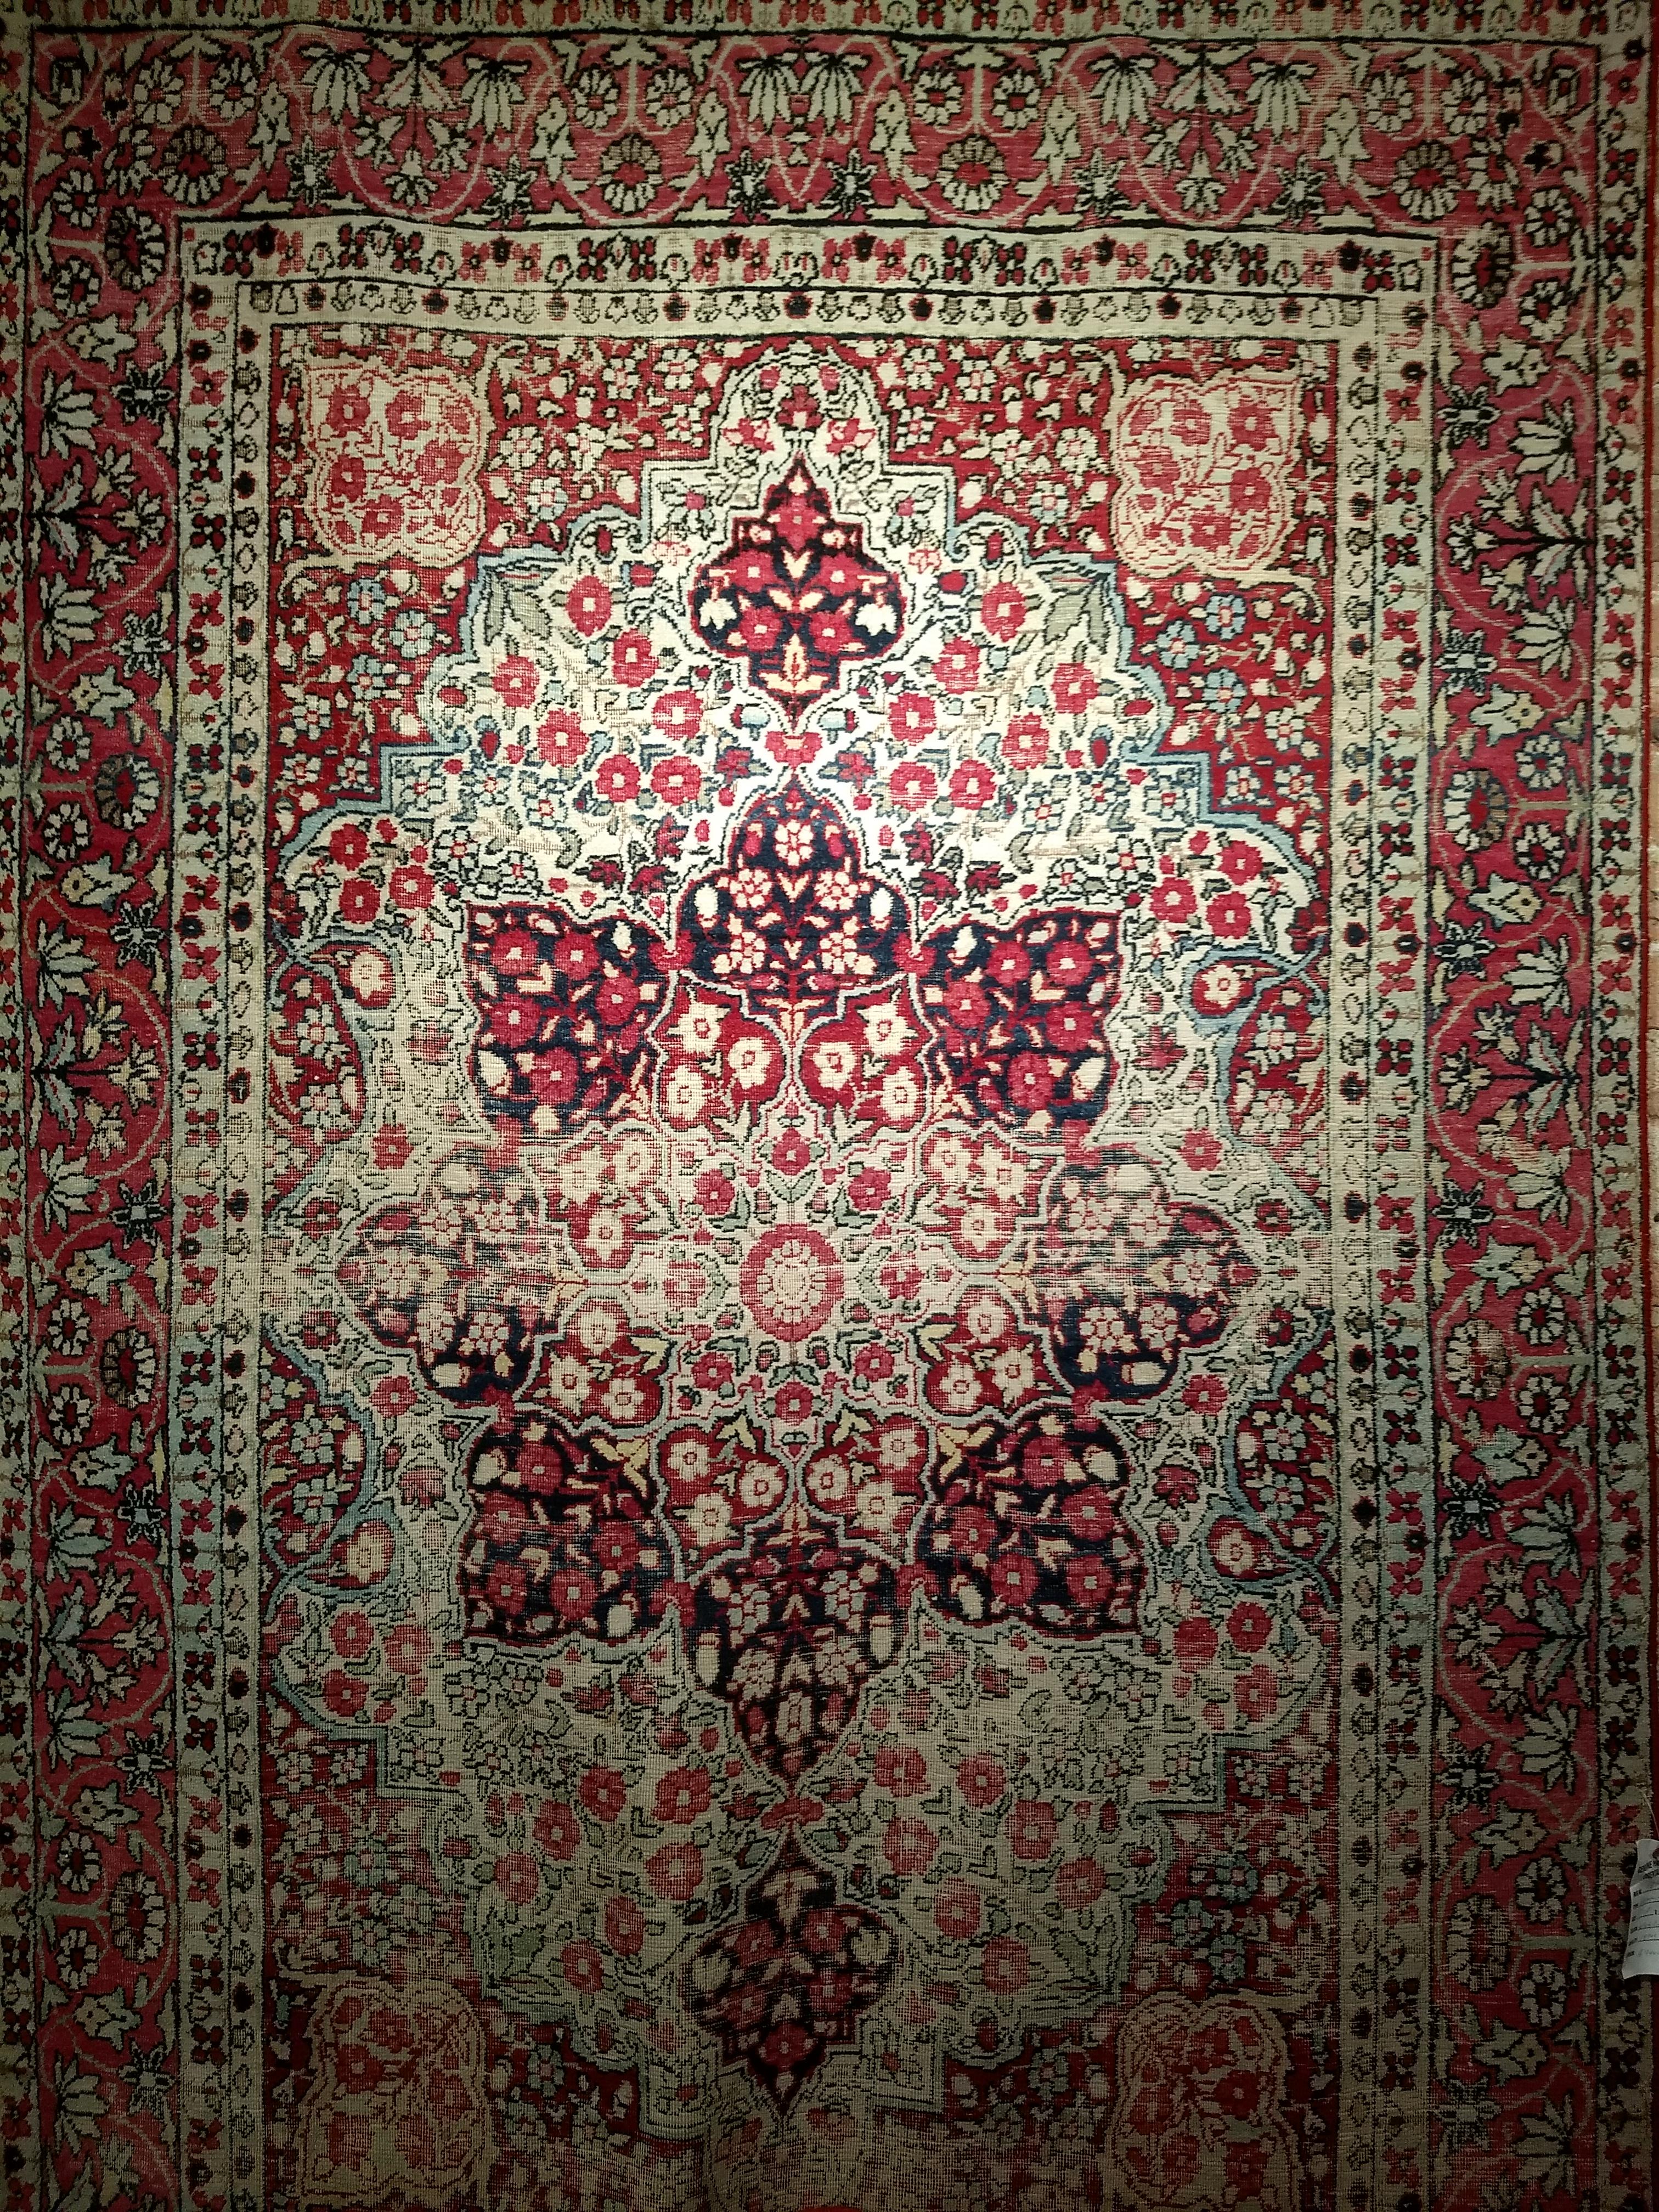 A beautiful Kerman Lavar rug from the late 1800s. The main field is in an ivory color with the corner spandrels in red and a rose red color border. The rug has a floral design in red, light blue, and cream colors. The border is in red color with